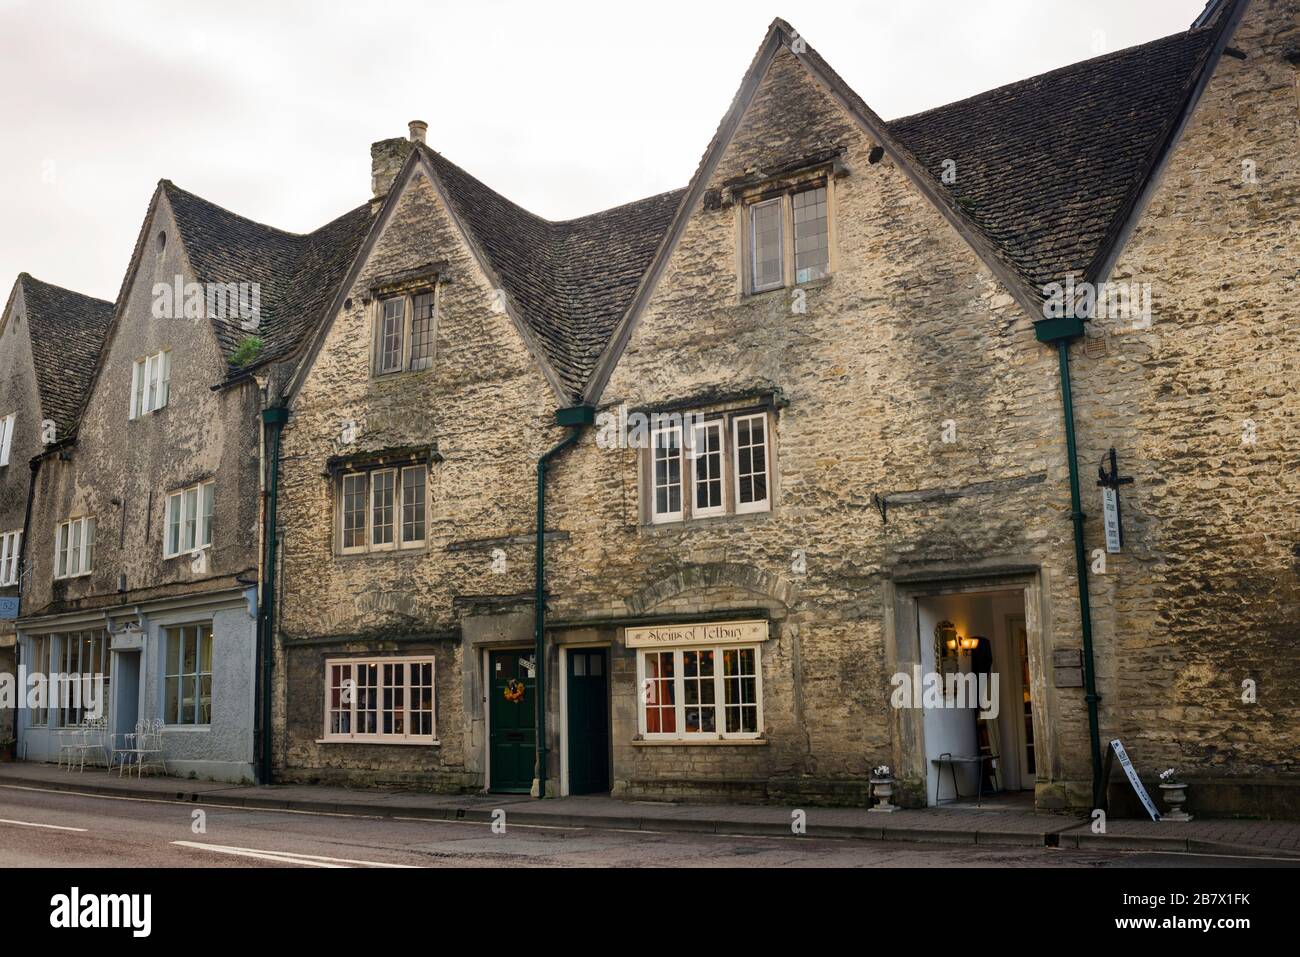 The wool town of Tetbury, England in the Cotswolds. Stock Photo